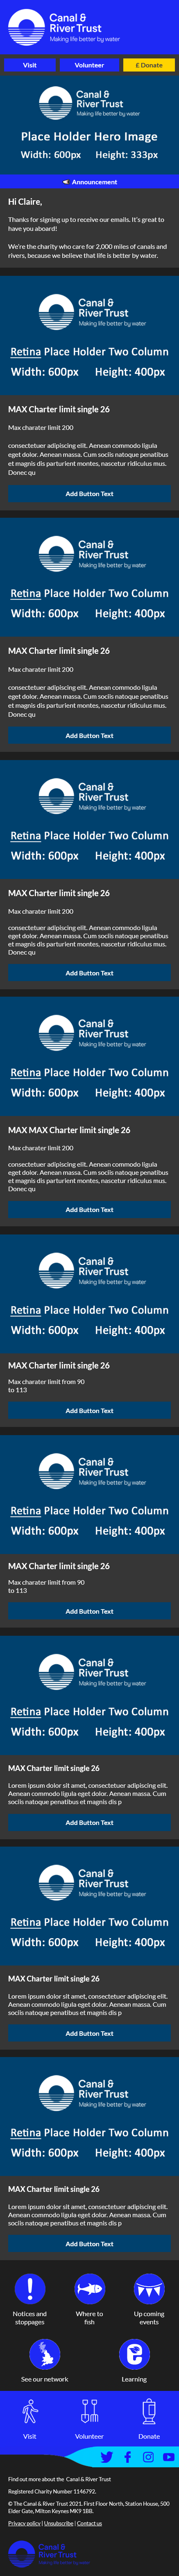 Email Templates Created For Canal River Trust Marketing Charity Dark mode on mobile design